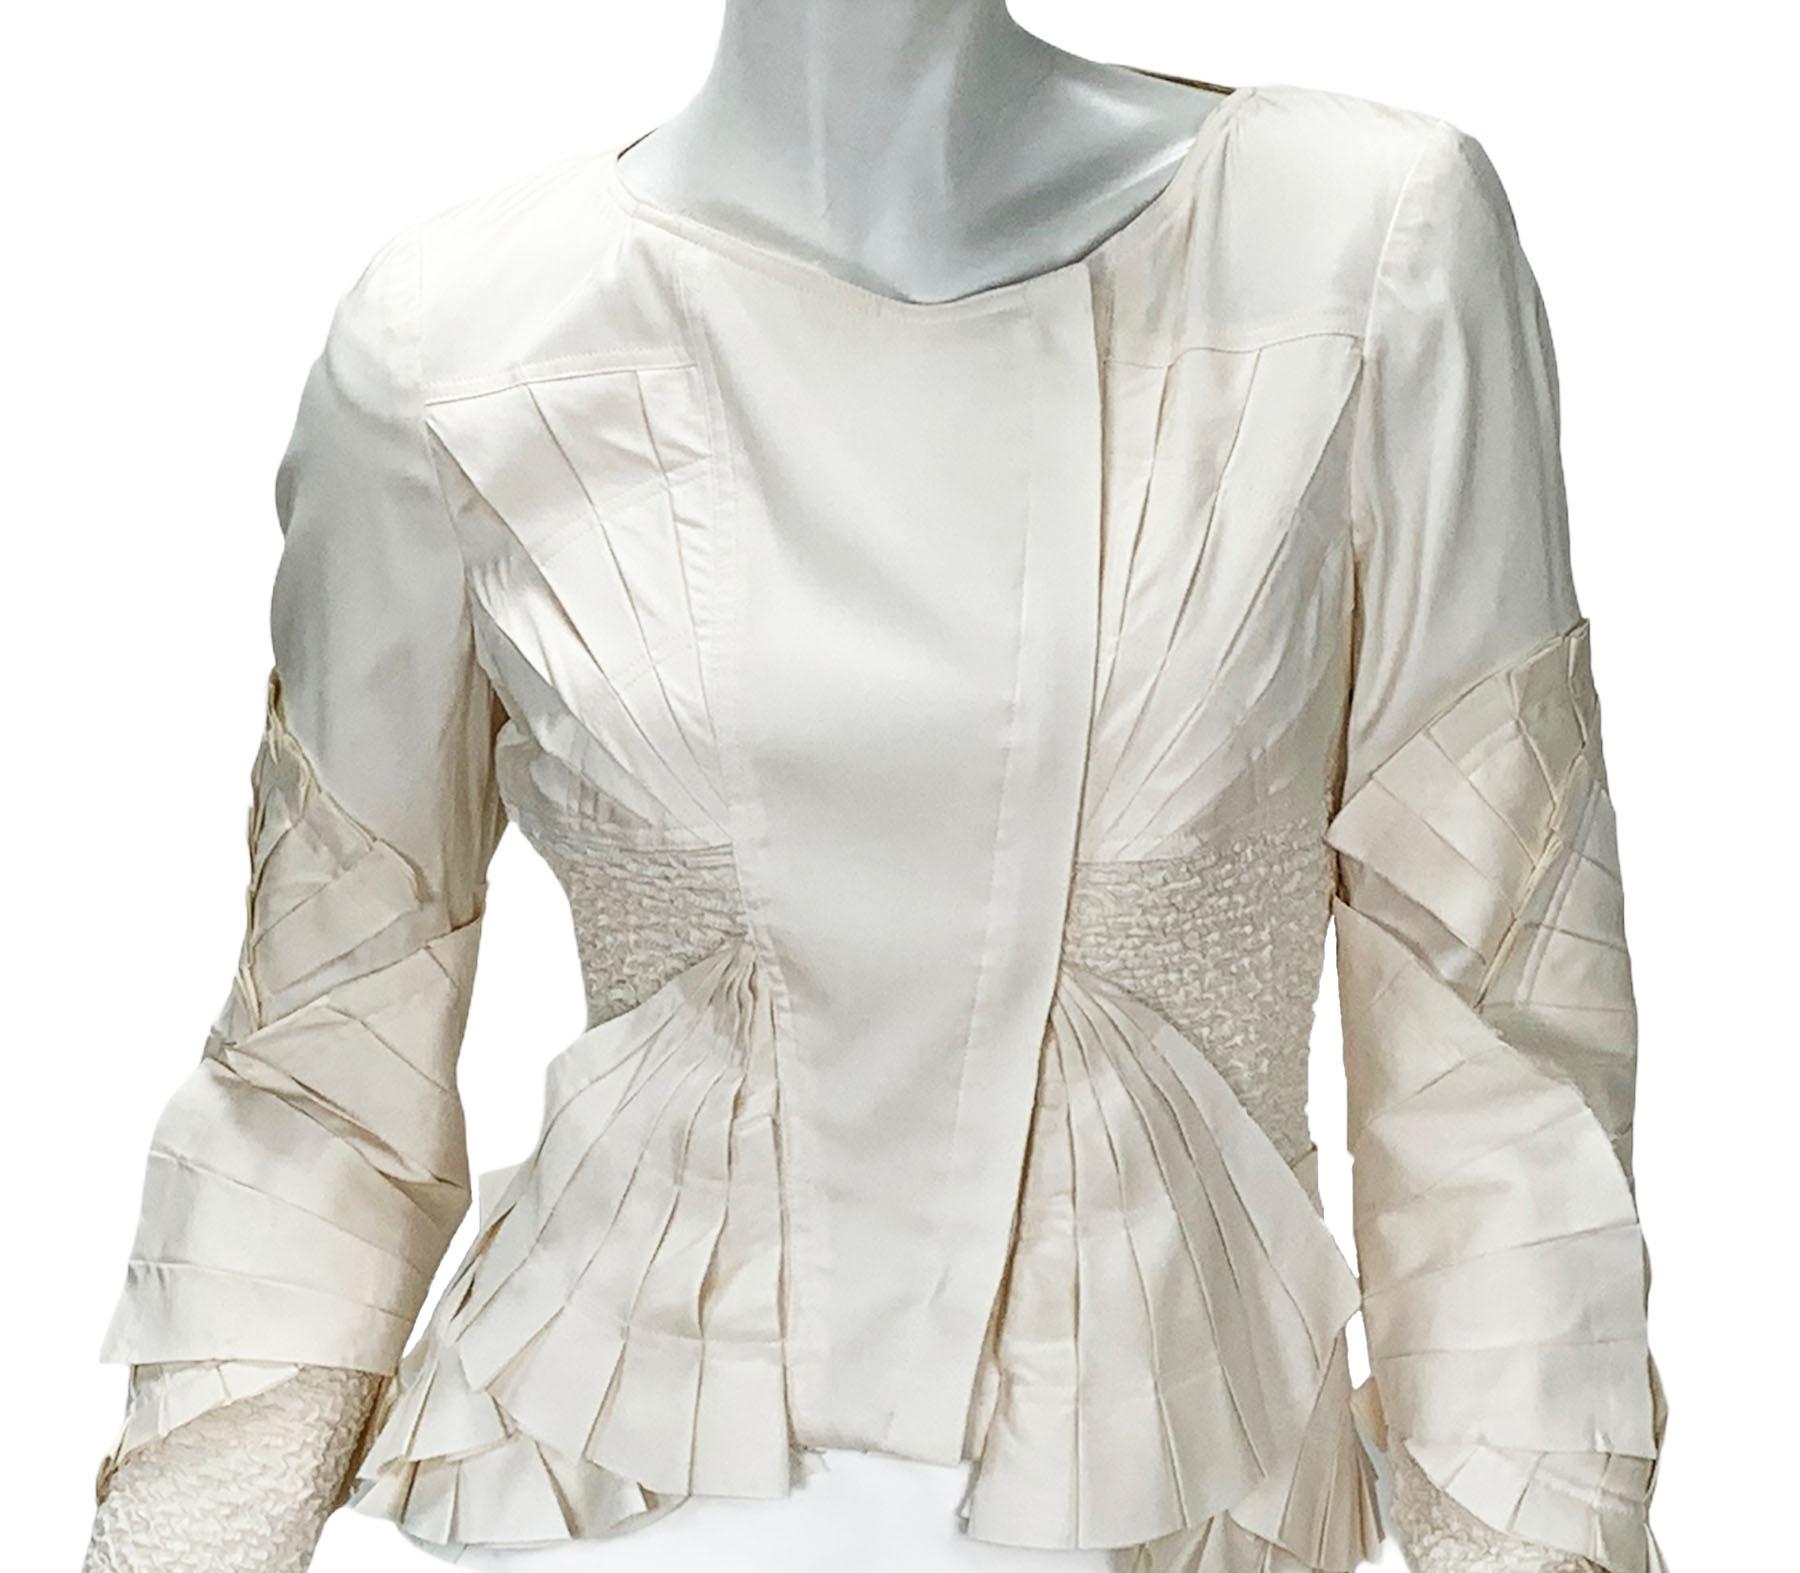 NWT Tom Ford for Gucci S/S 2004 Silk Off-White Color Fan Pleated Jacket It 42 en vente 2